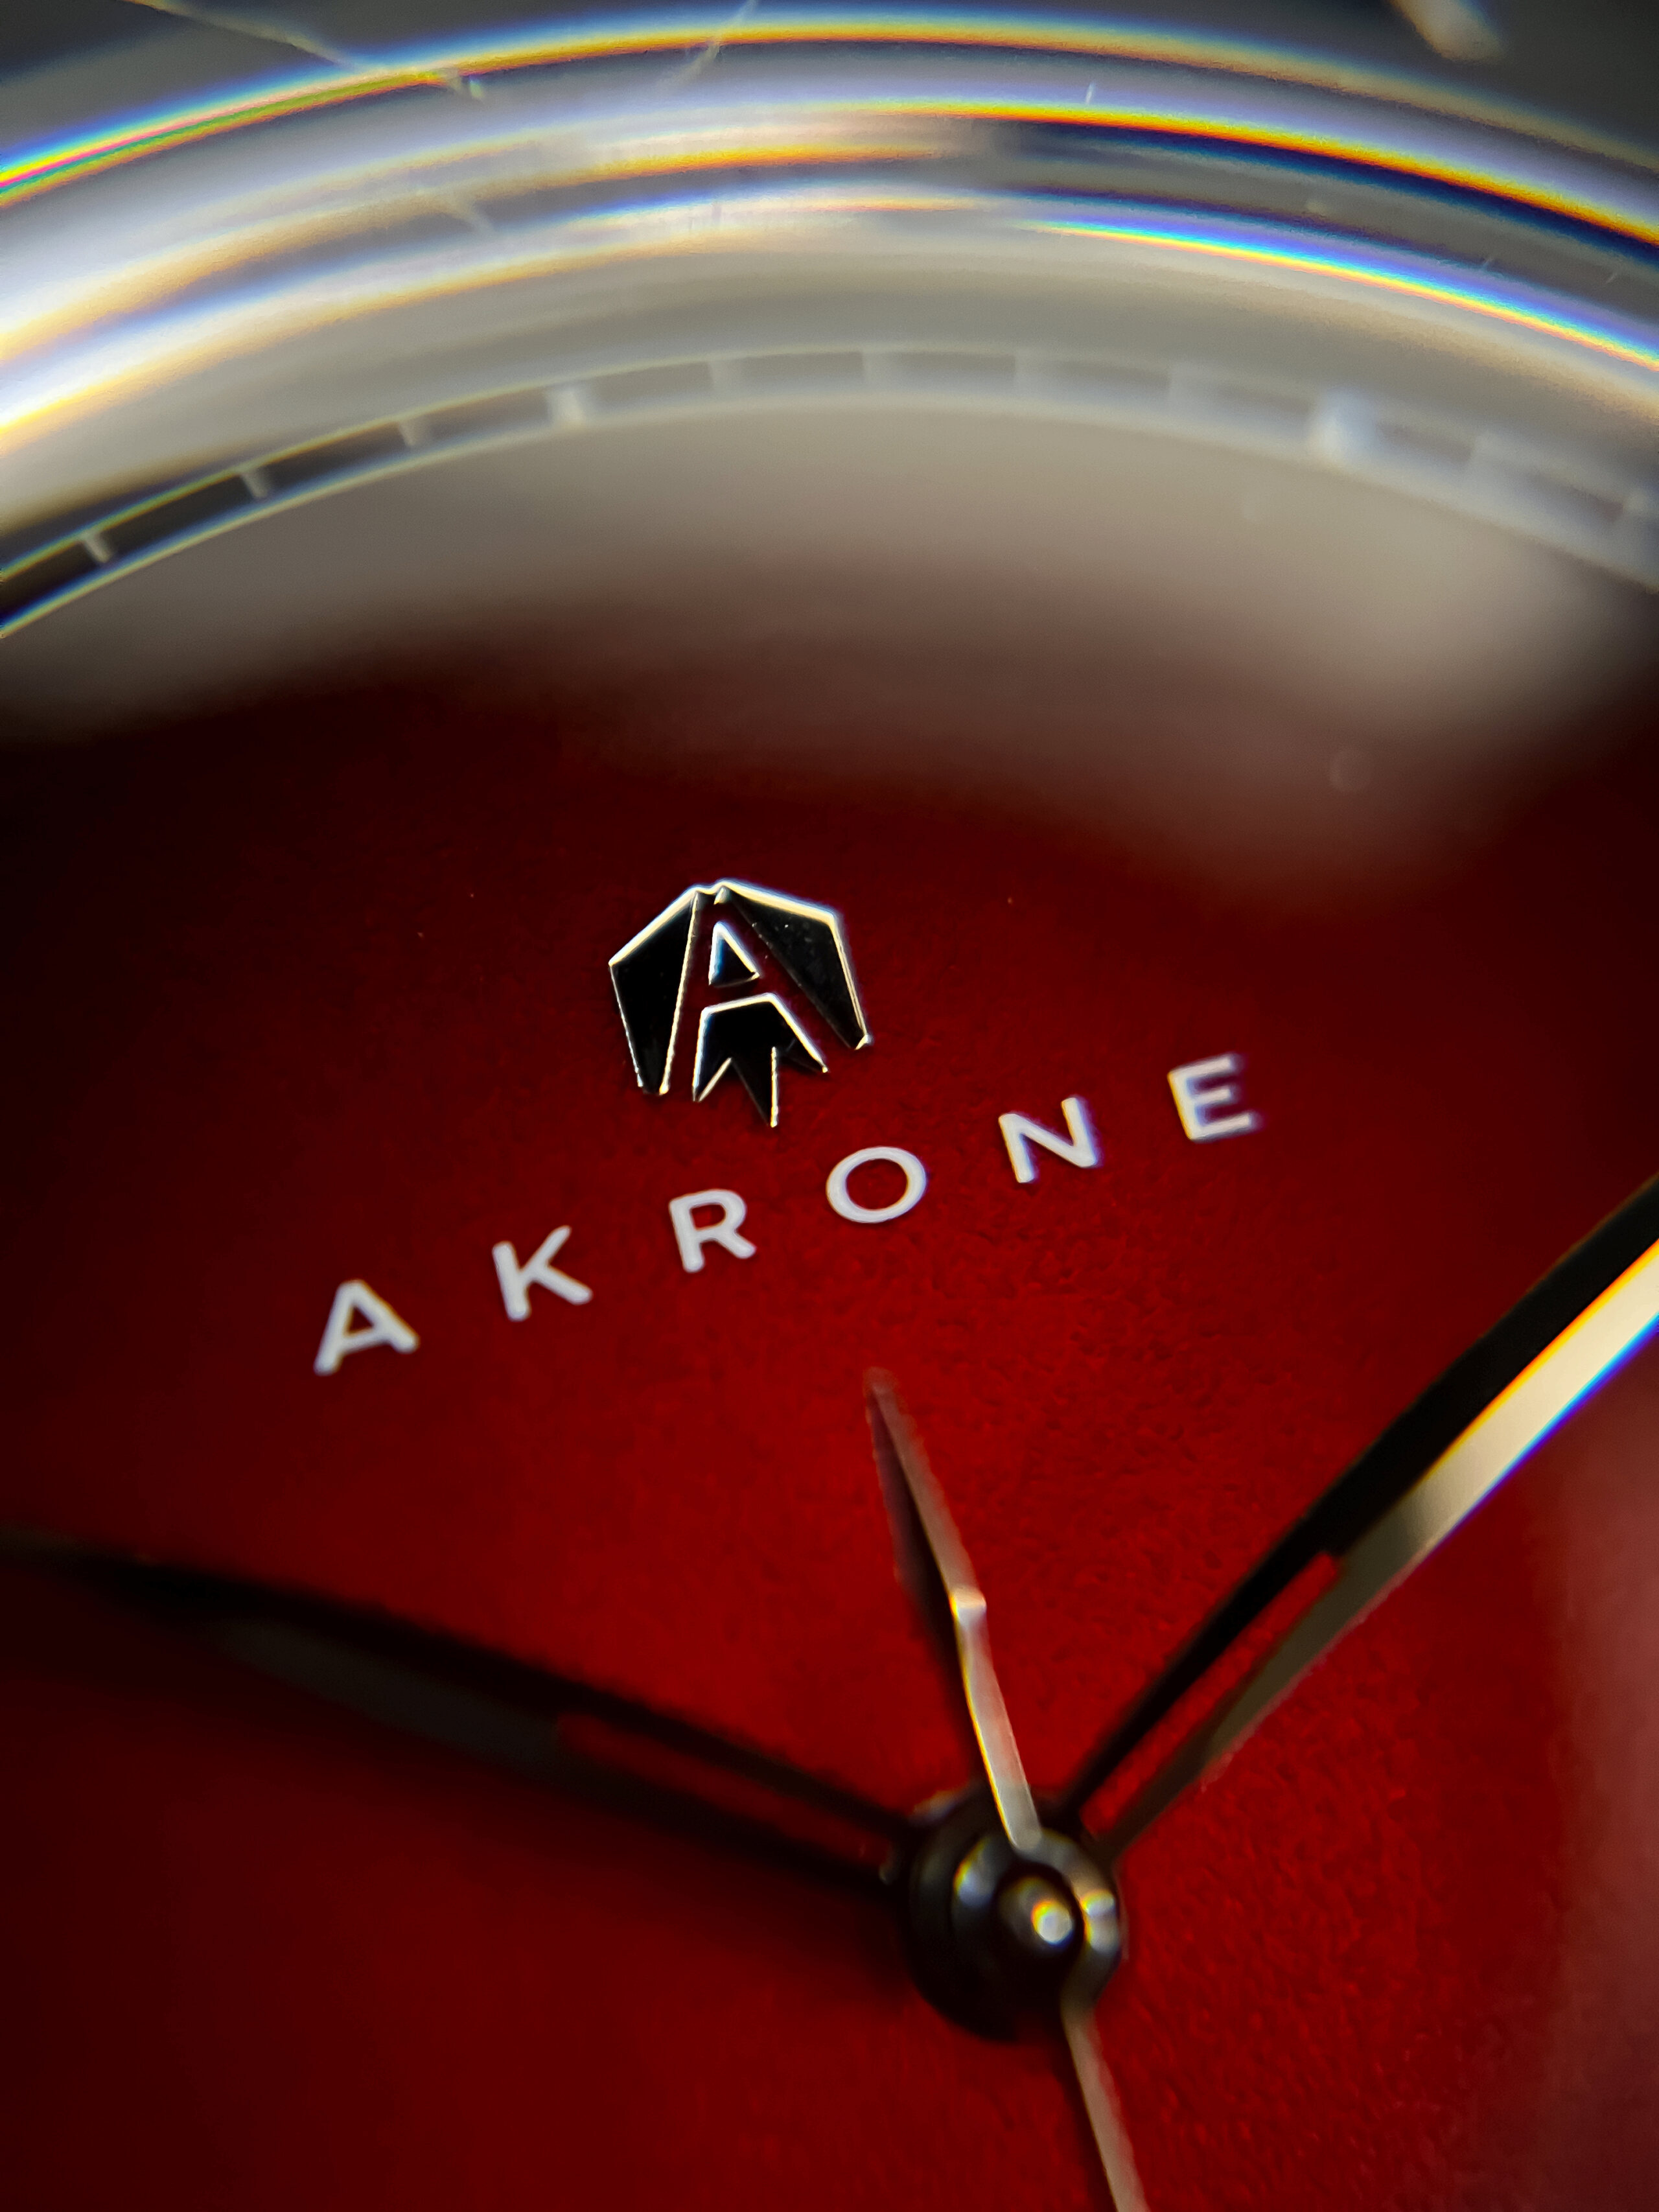 akrone - Akrone : des montres, tout simplement (tome 2) - Page 19 993f0a10